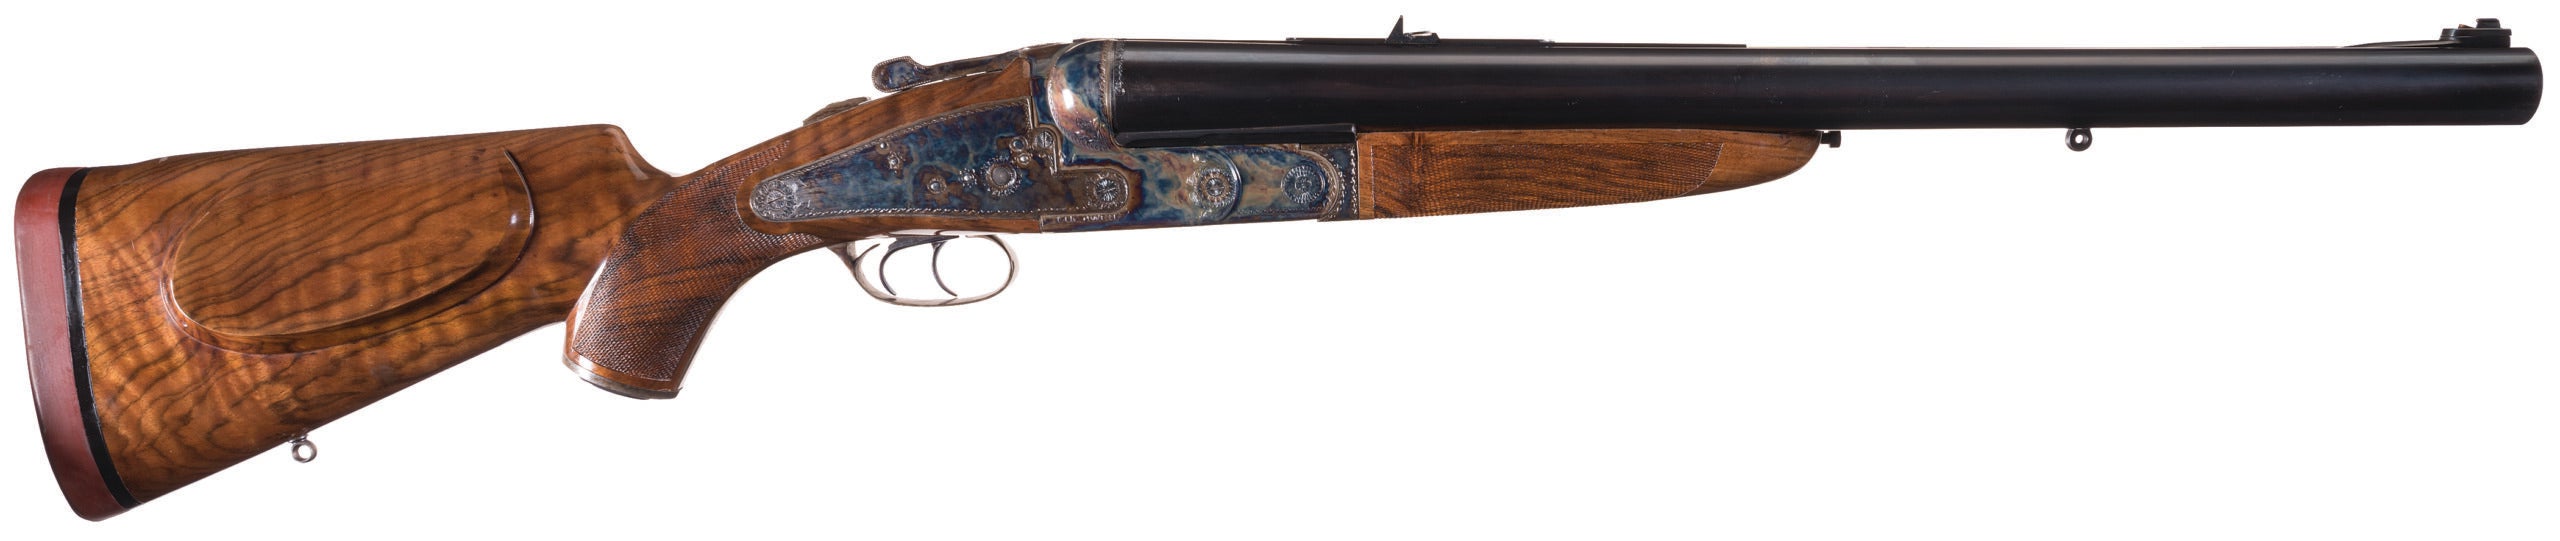 Blasts From the Past: A 4-Bore Rifle | Field & Stream